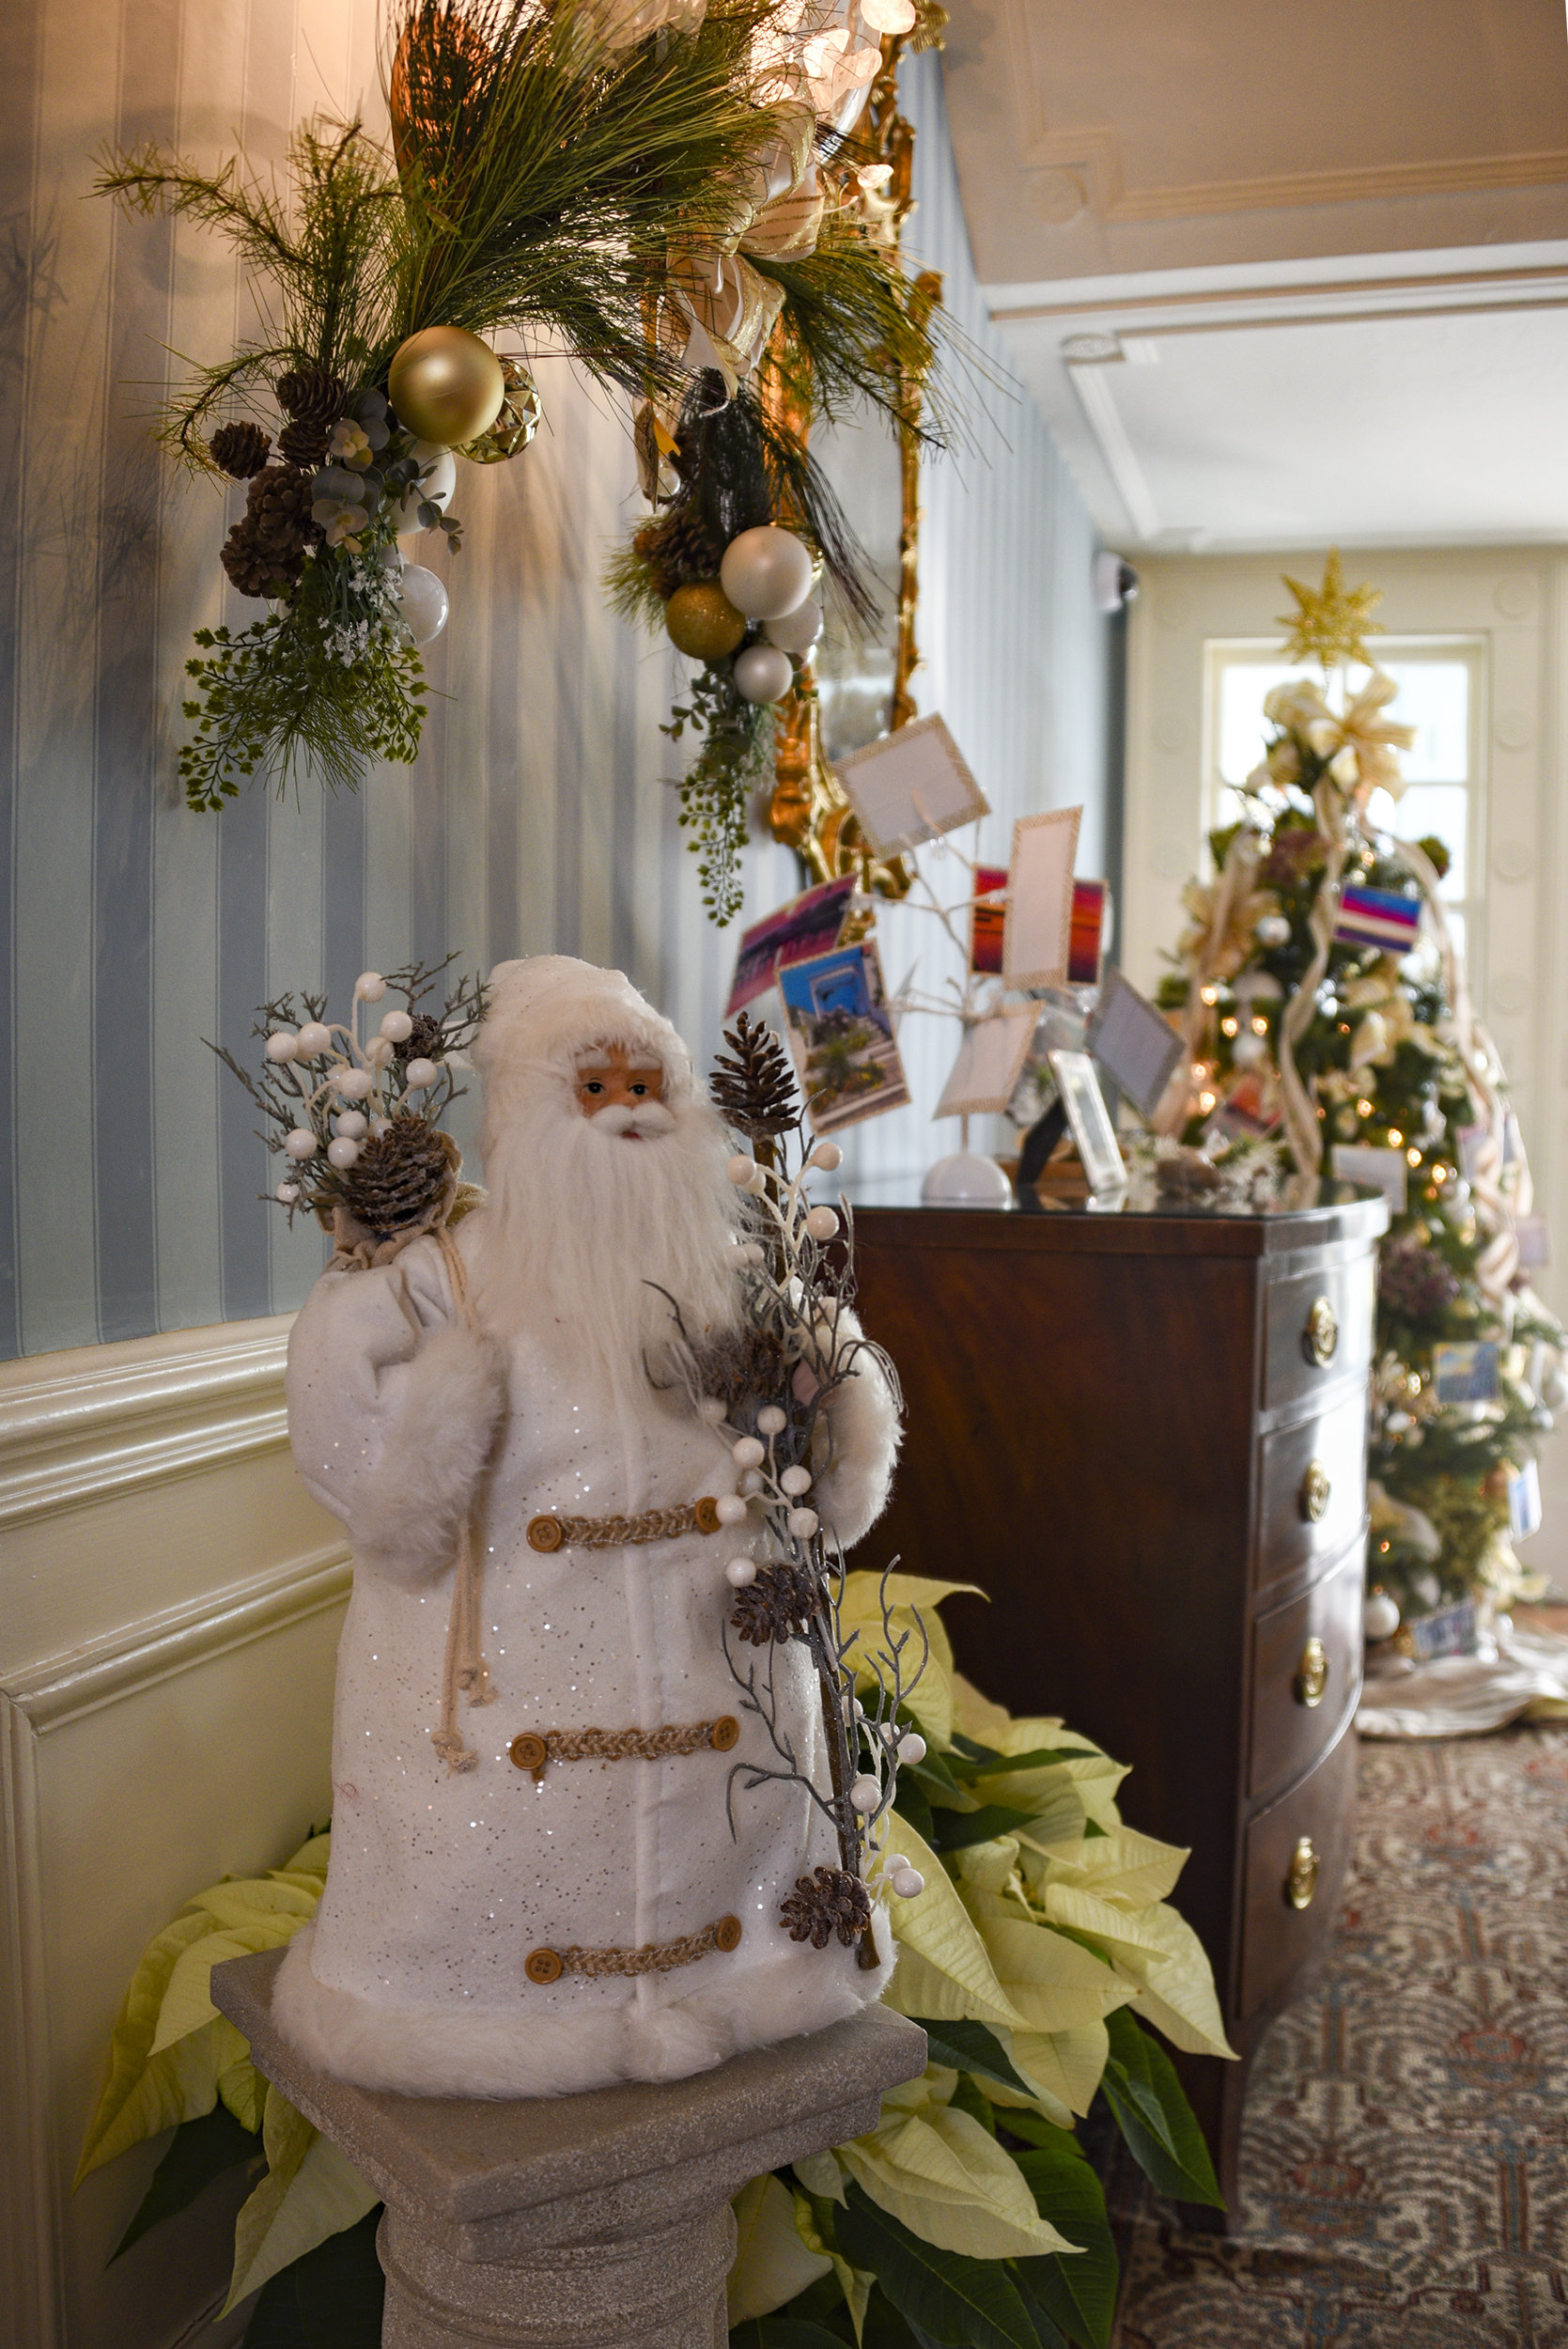 The Foyer, by Keyport Garden Club, features numerous elegant decorations including a white-robed Santa Claus figure and a large wall spray of greenery with gold and cream colored balls and pinecones.